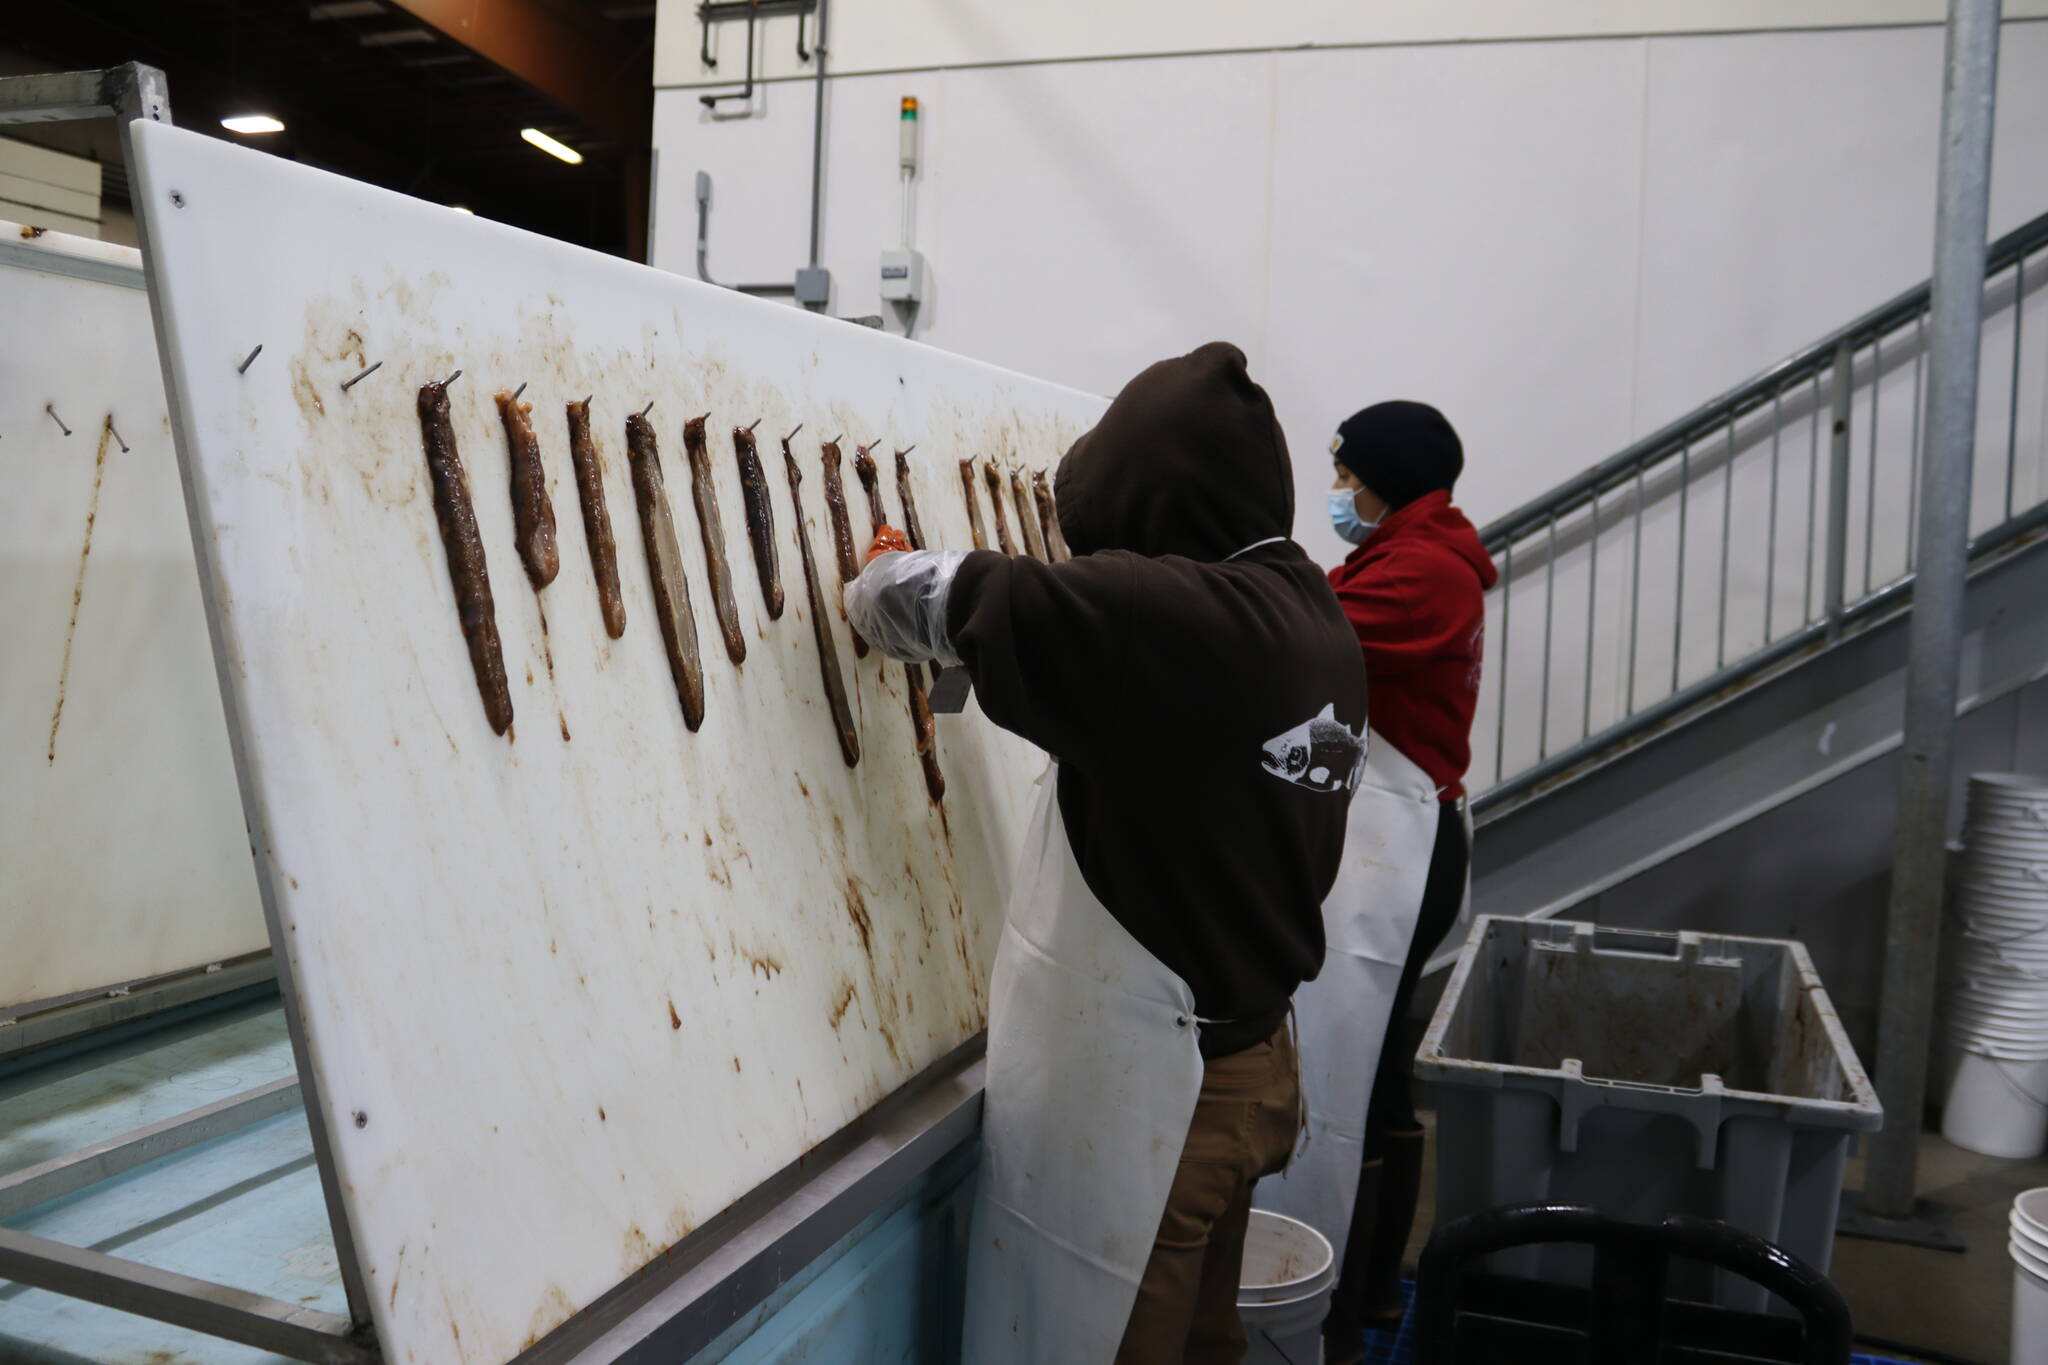 Workers at Alaska Glacier Seafoods clean sea cucumbers, separating meat from skin, at the processing plant on Thursday. In recent years the company has been shipping most of the product to domestic markets. (Meredith Jordan/ Juneau Empire)